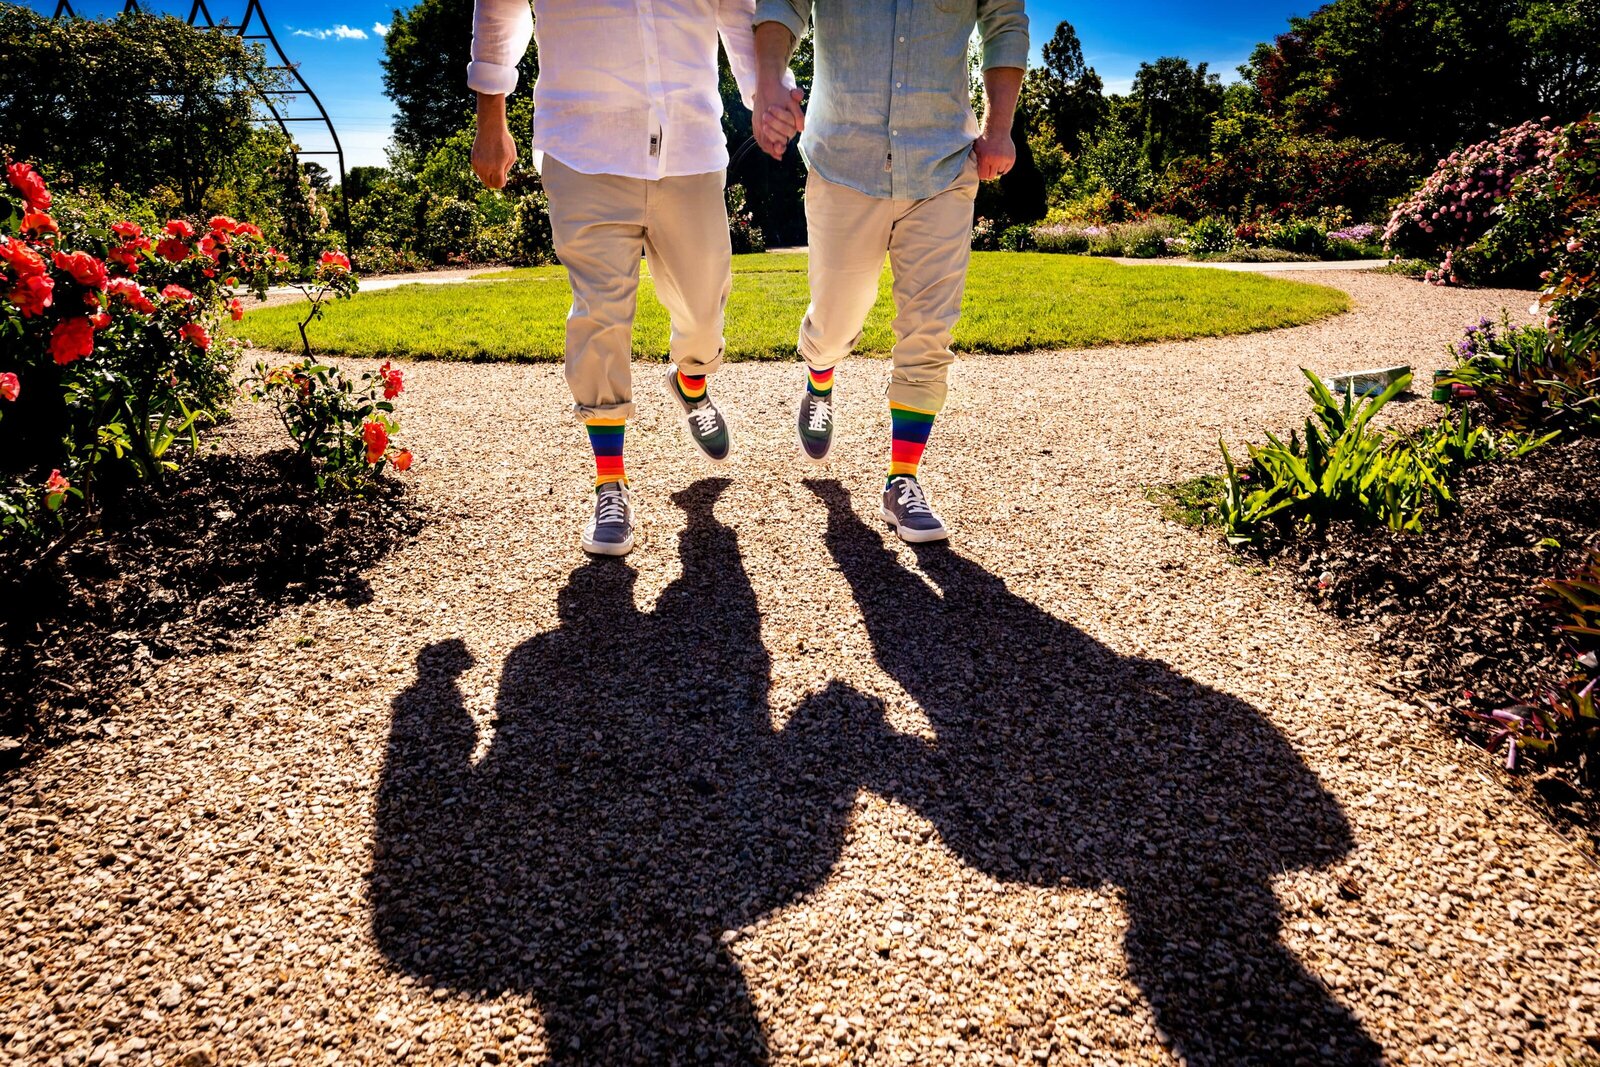 two men wearing coordinated outfits and rainbow socks holding hands and walking toward the camera. The frame shows them from chest down  with their shadows extending in front of them toward the camera